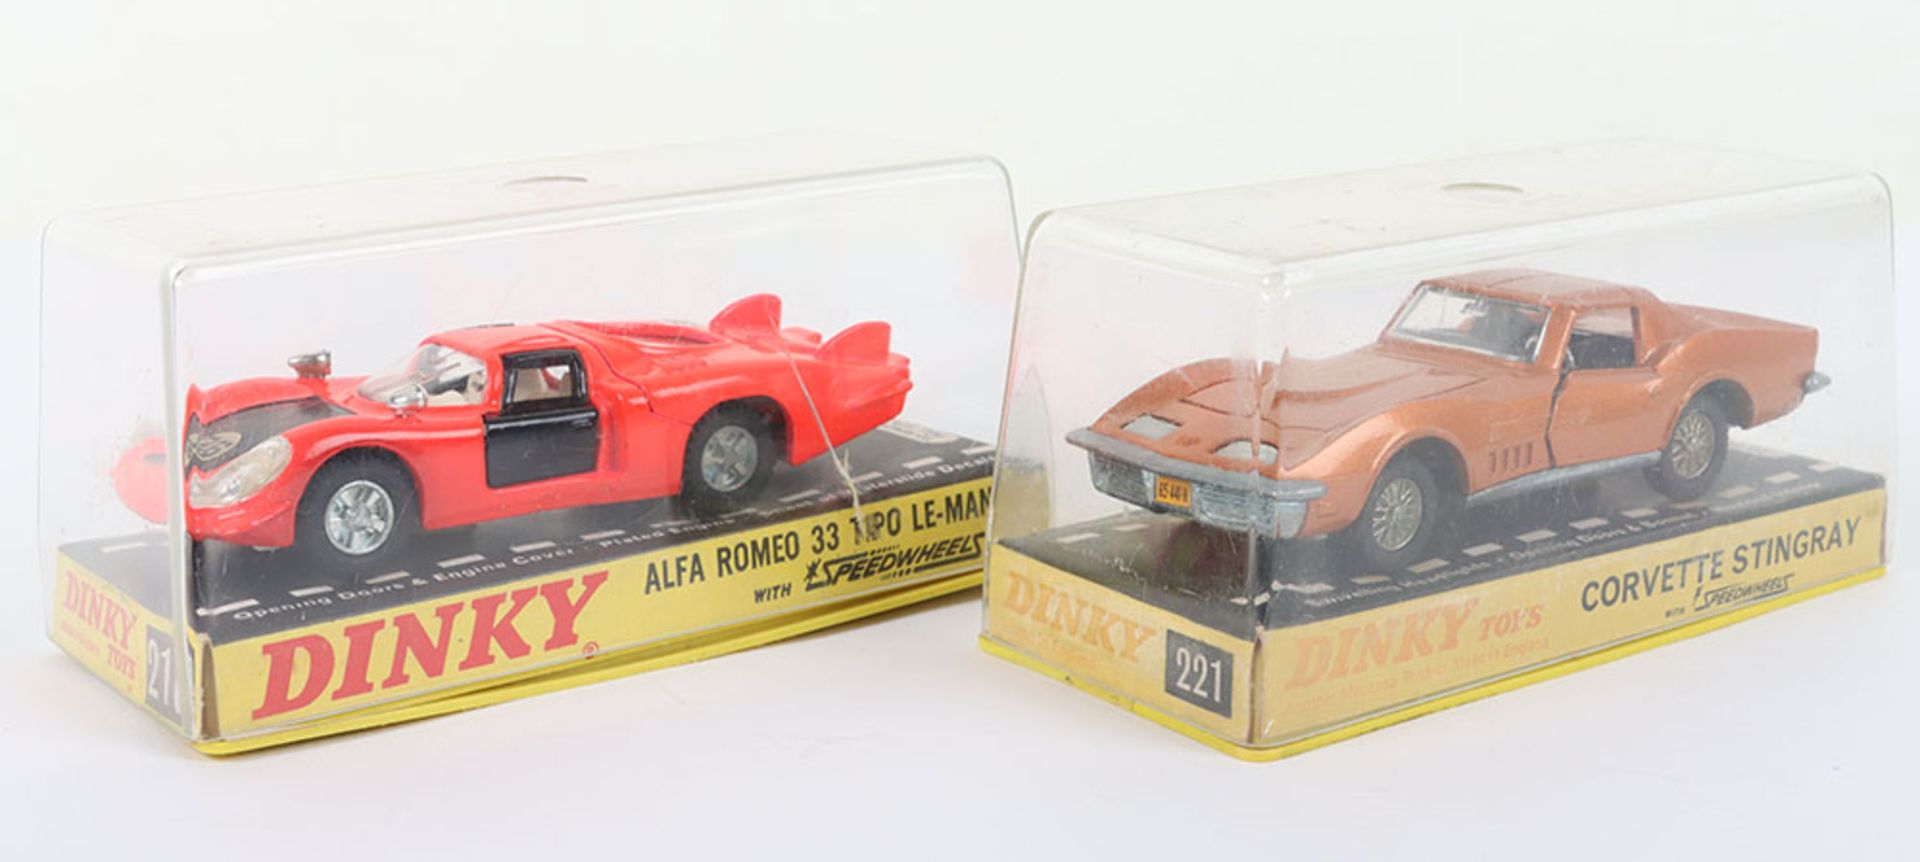 Two Dinky Toys Boxed Cars